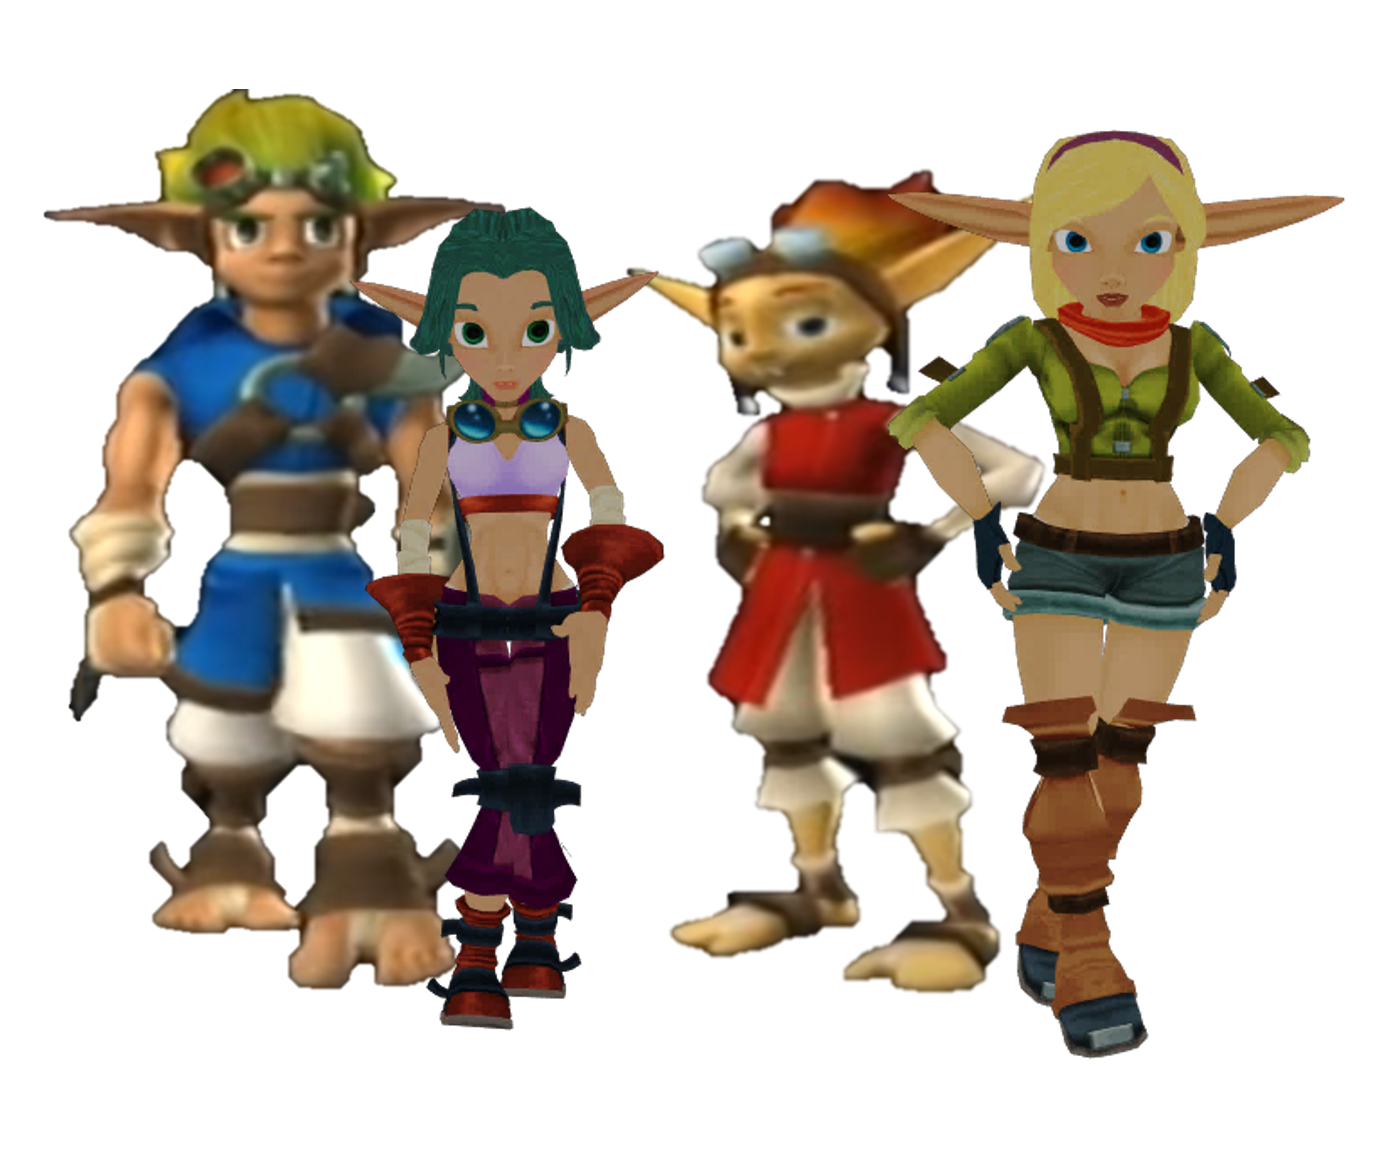 Photo of Jak x Keira Hagai and Daxter x Tess Together for fans of Jak and.....